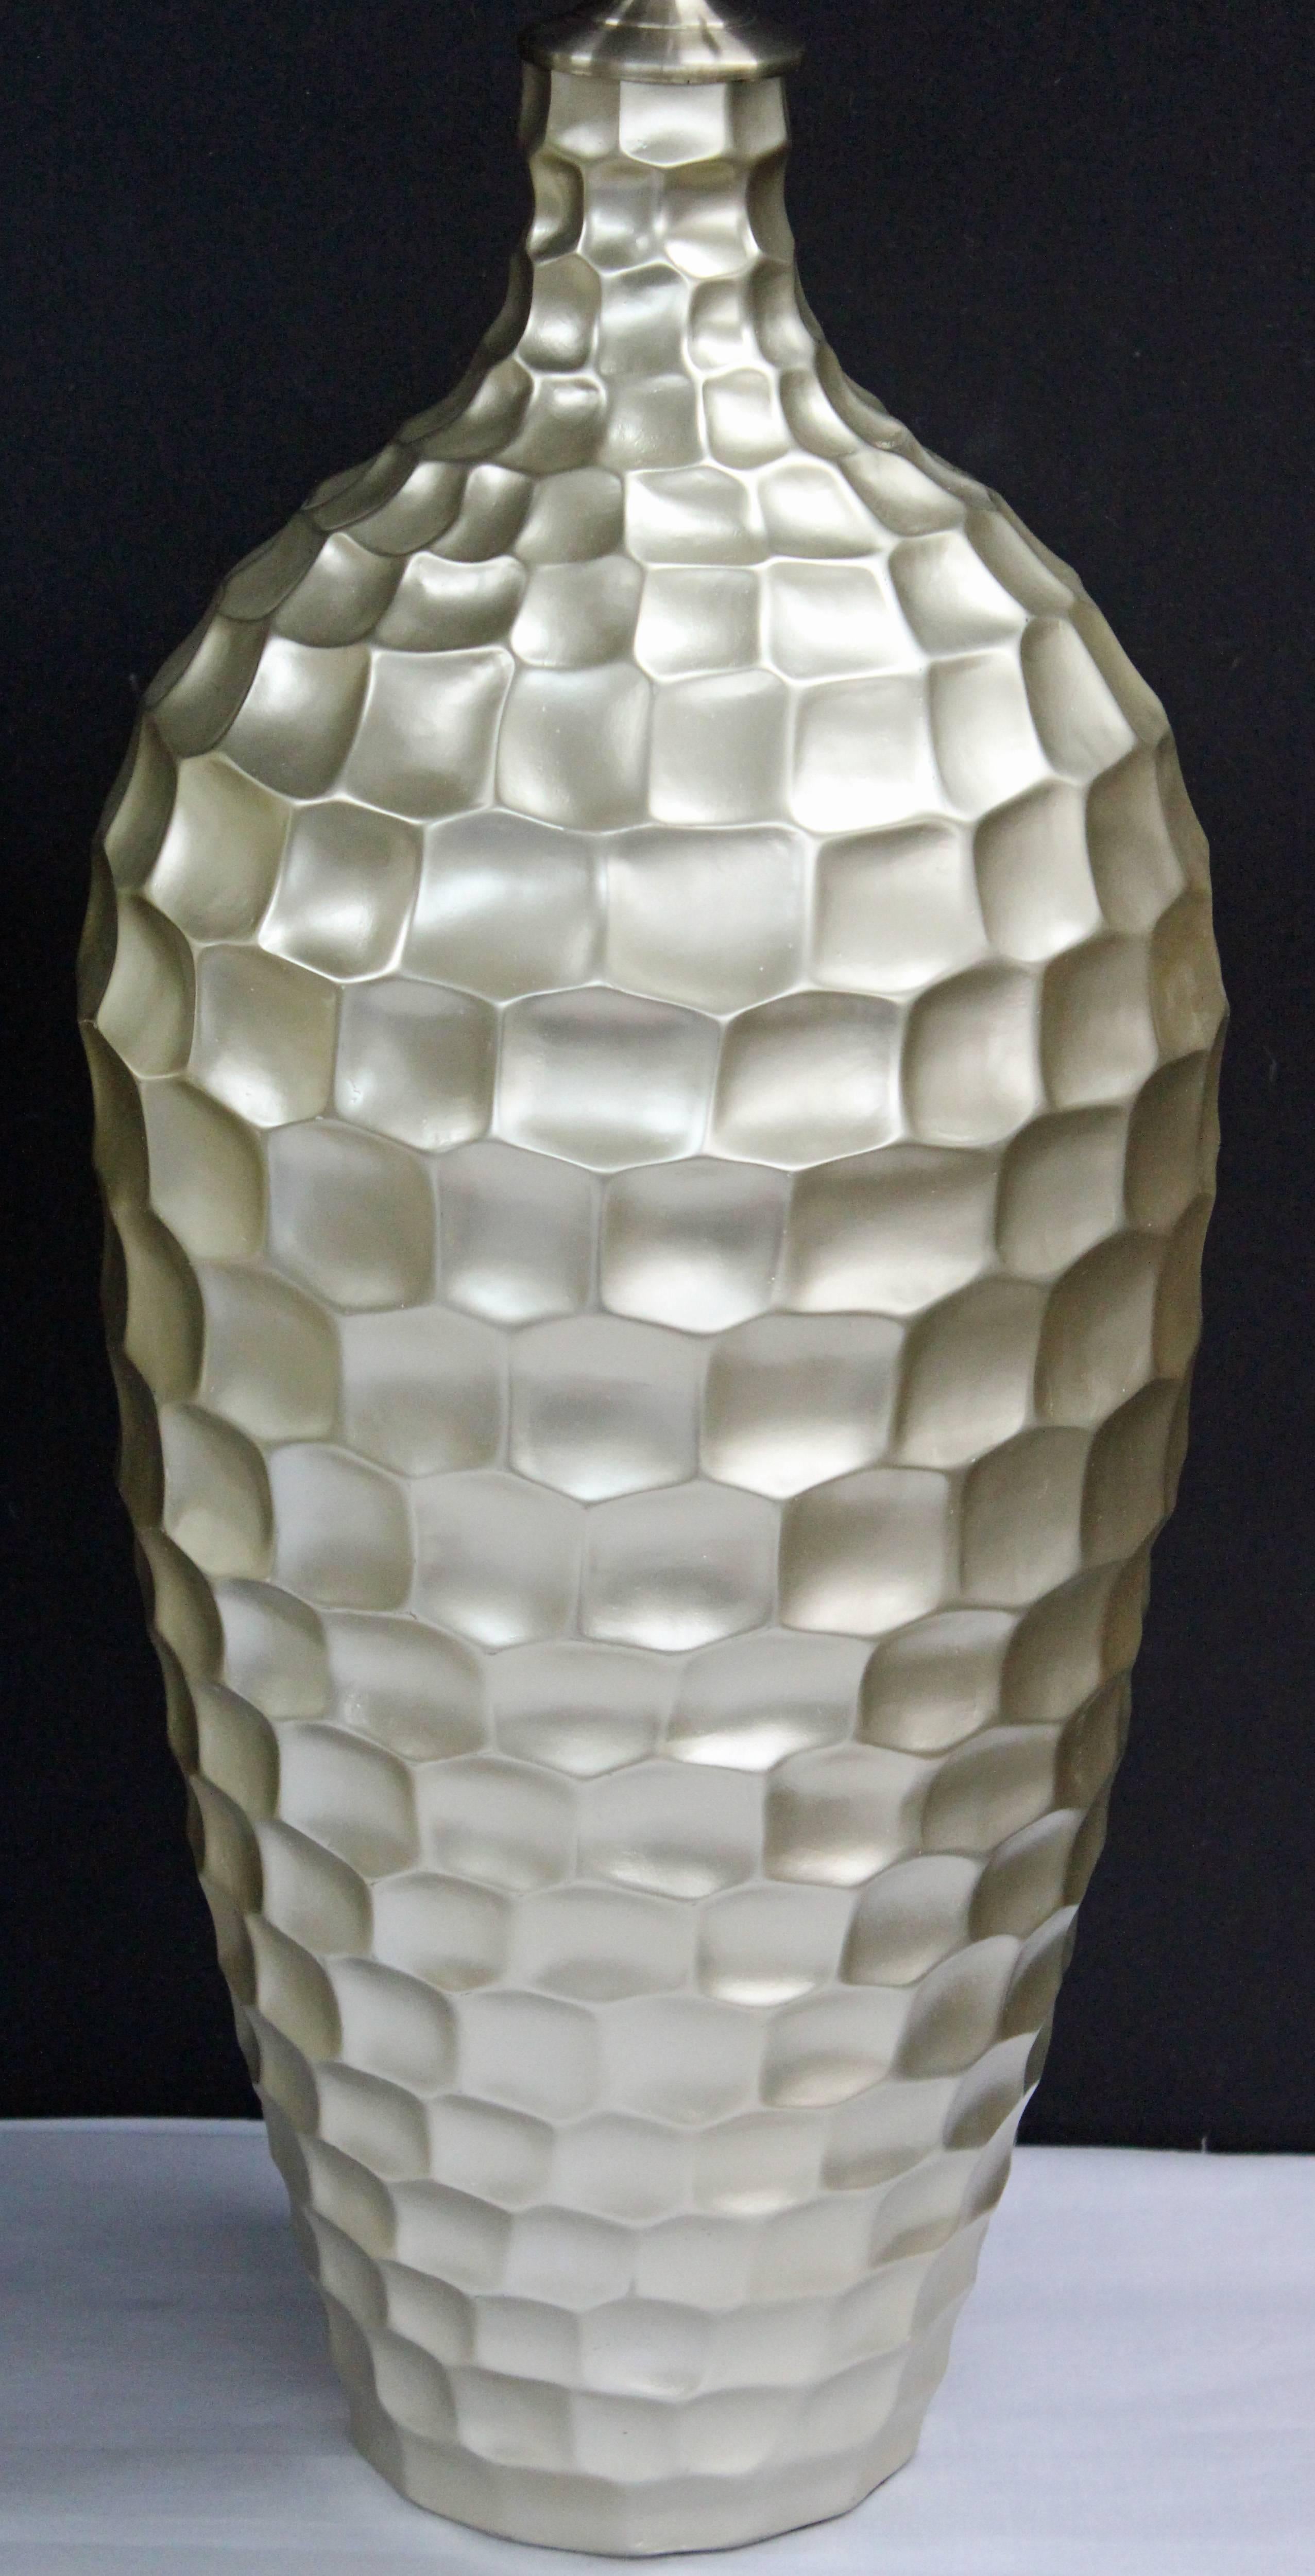 Pair of large textured ceramic vessels with lamp application. Finished in a satin pale gold, the vessels stand at 23